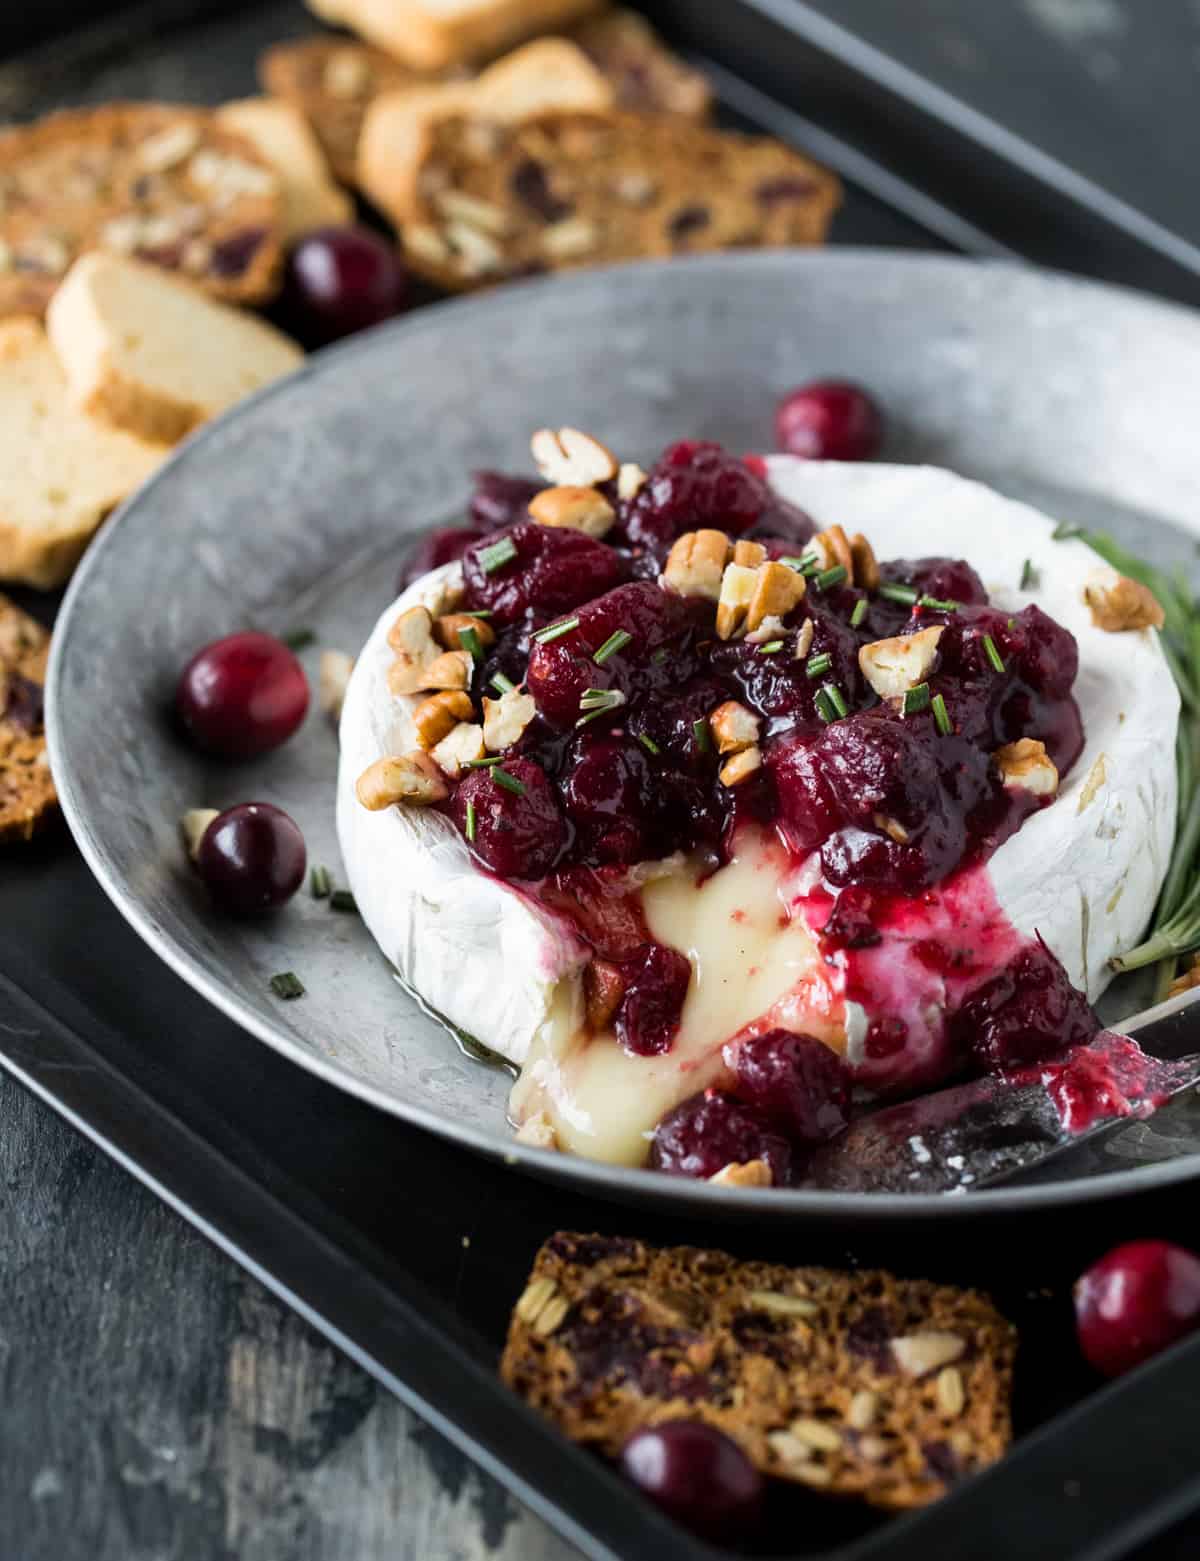 15 Best Baked Brie Recipes To Make Your Holidays Shine 